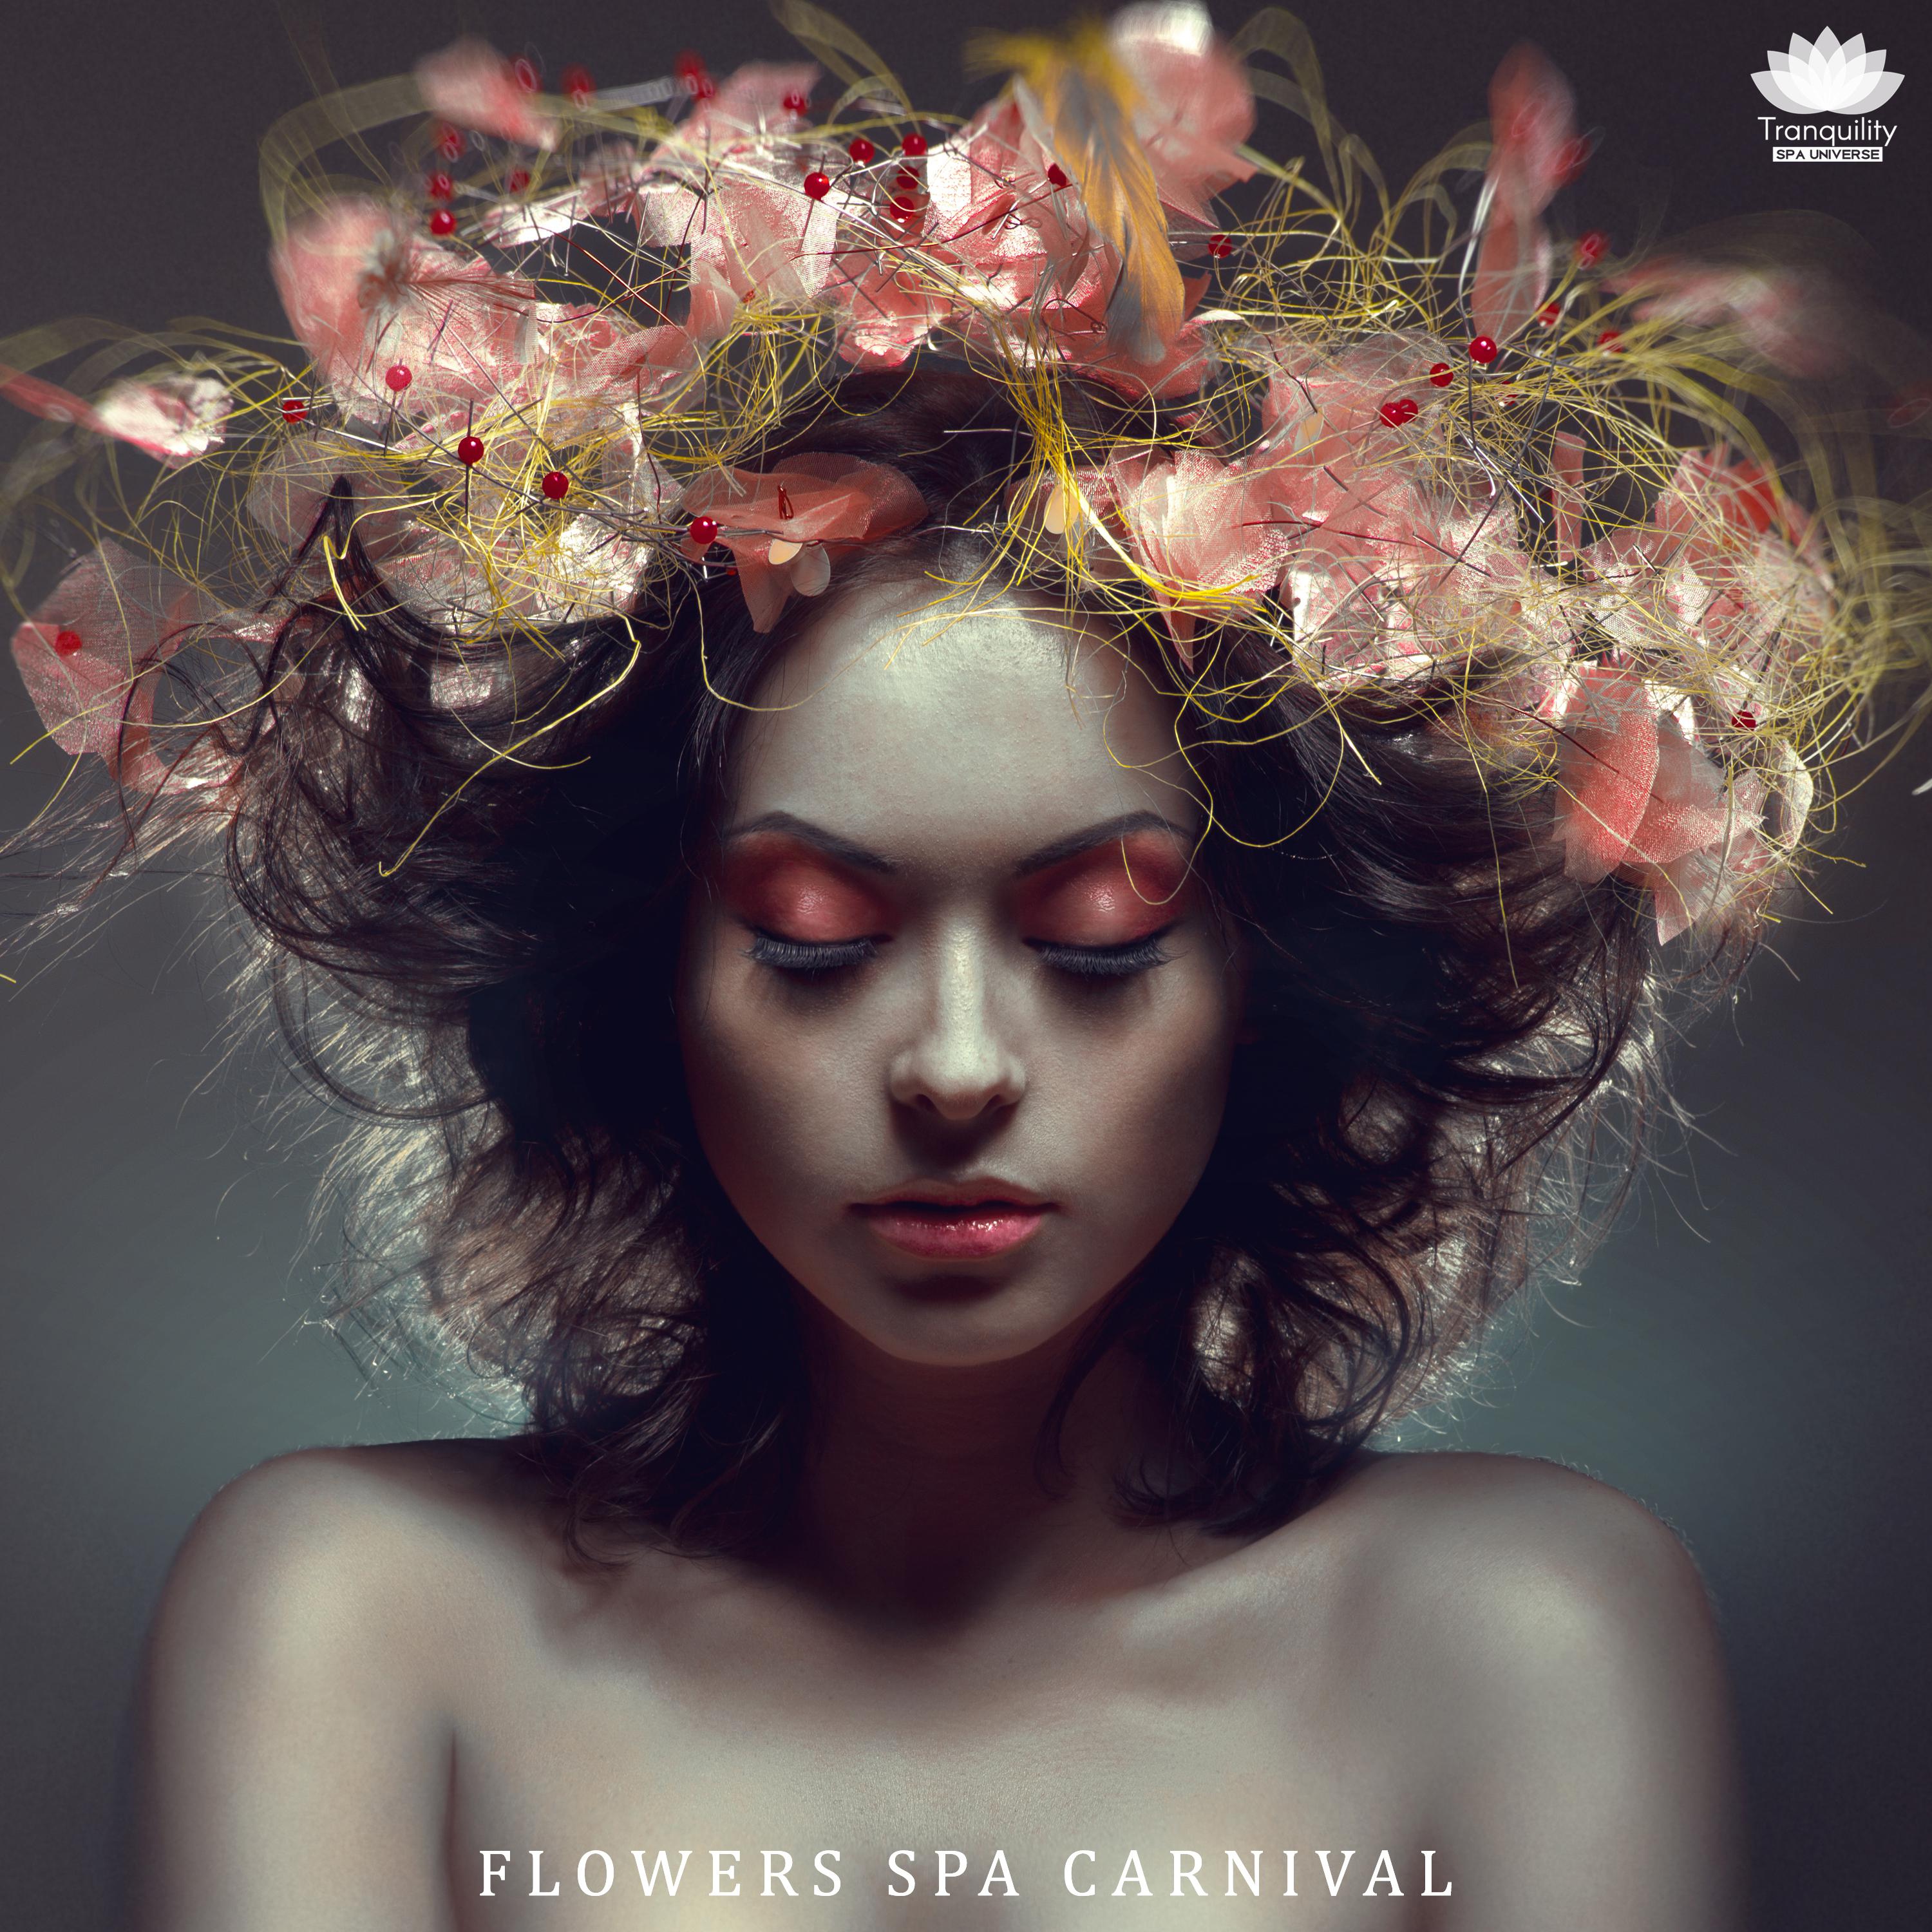 Flowers Spa Carnival (Thai Relaxation, Health & Beauty Music)